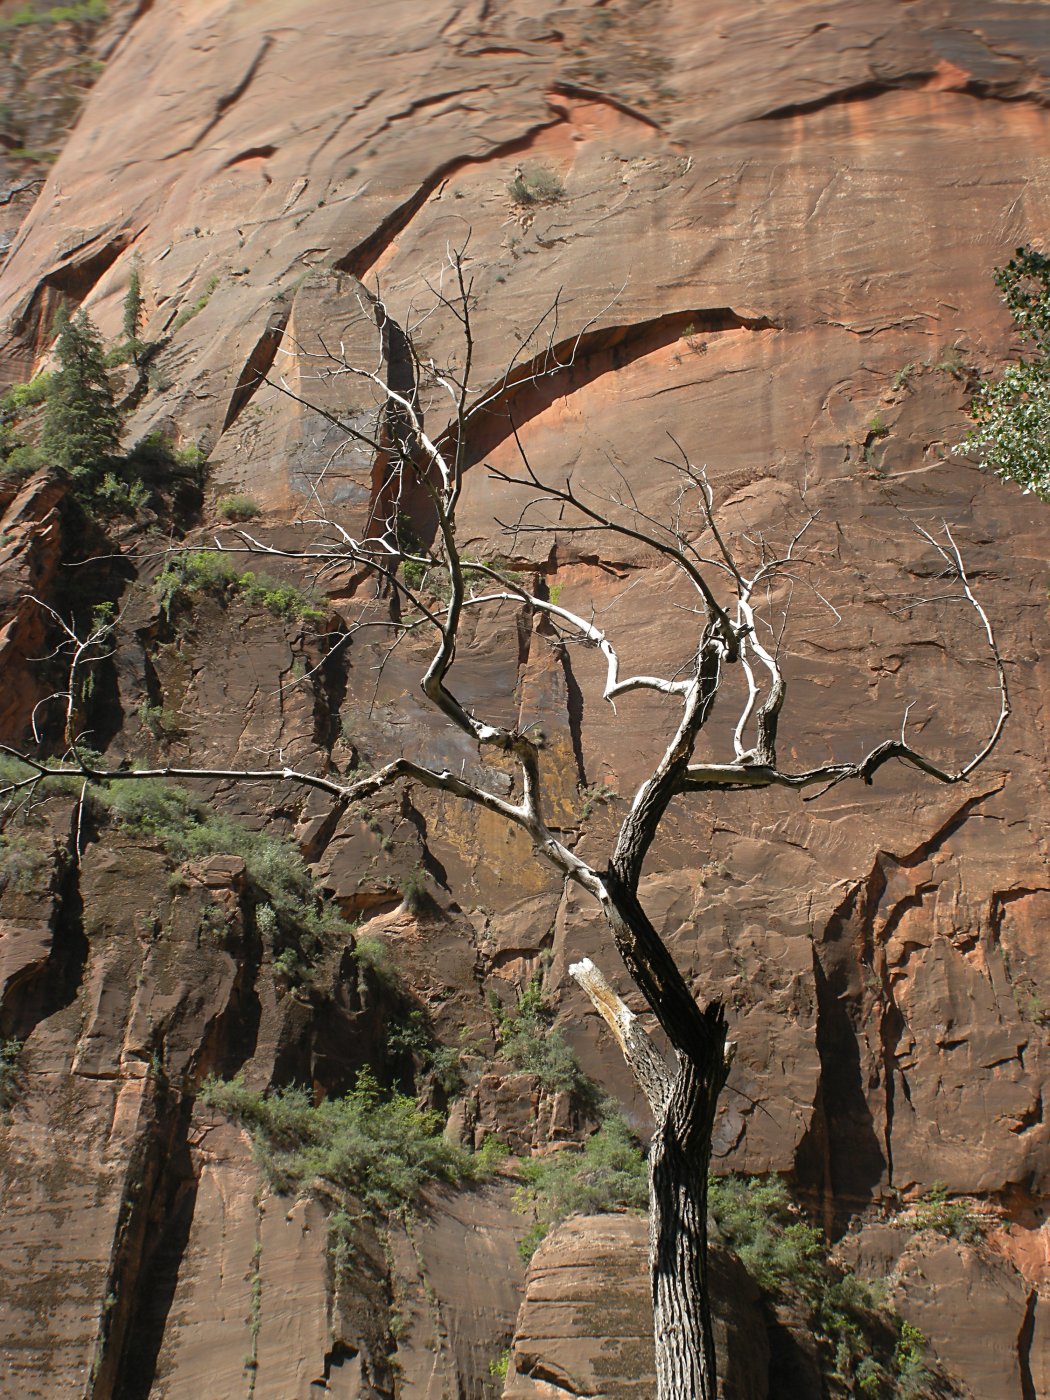 Dead tree and cliff, Zion National Park